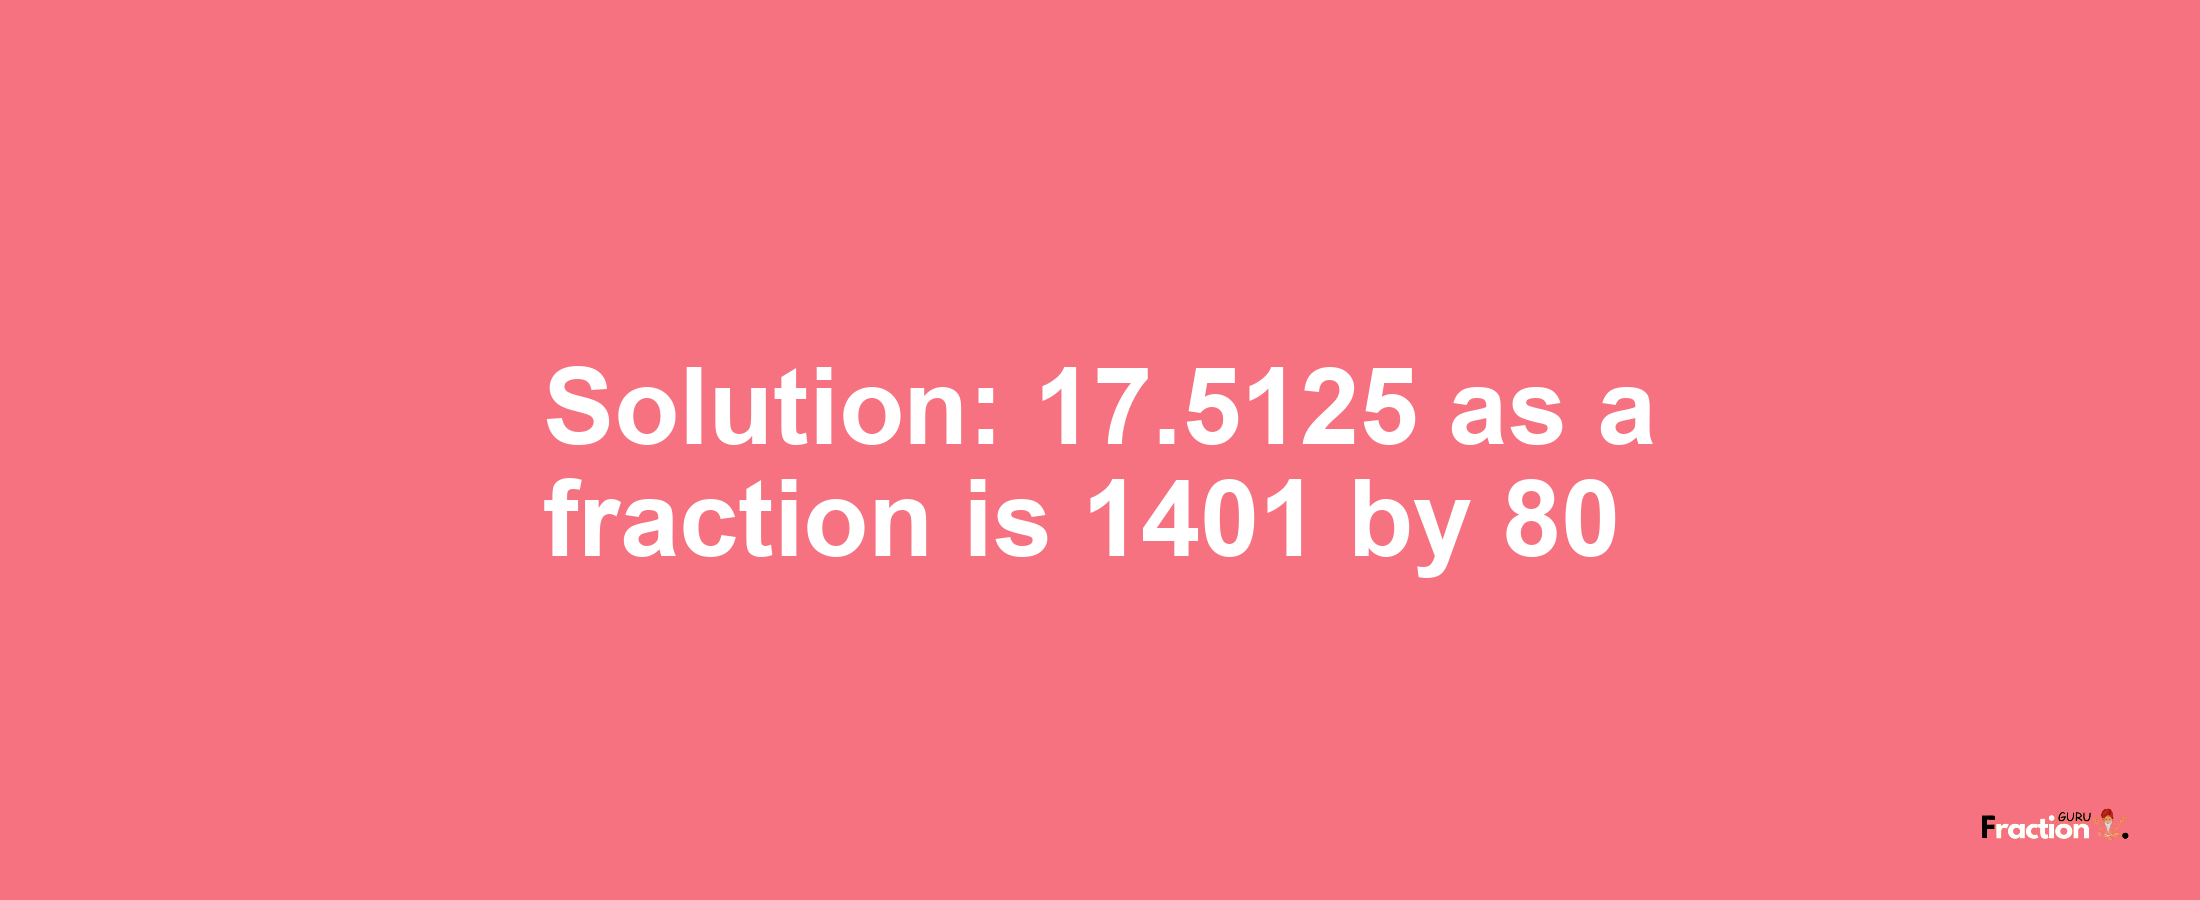 Solution:17.5125 as a fraction is 1401/80